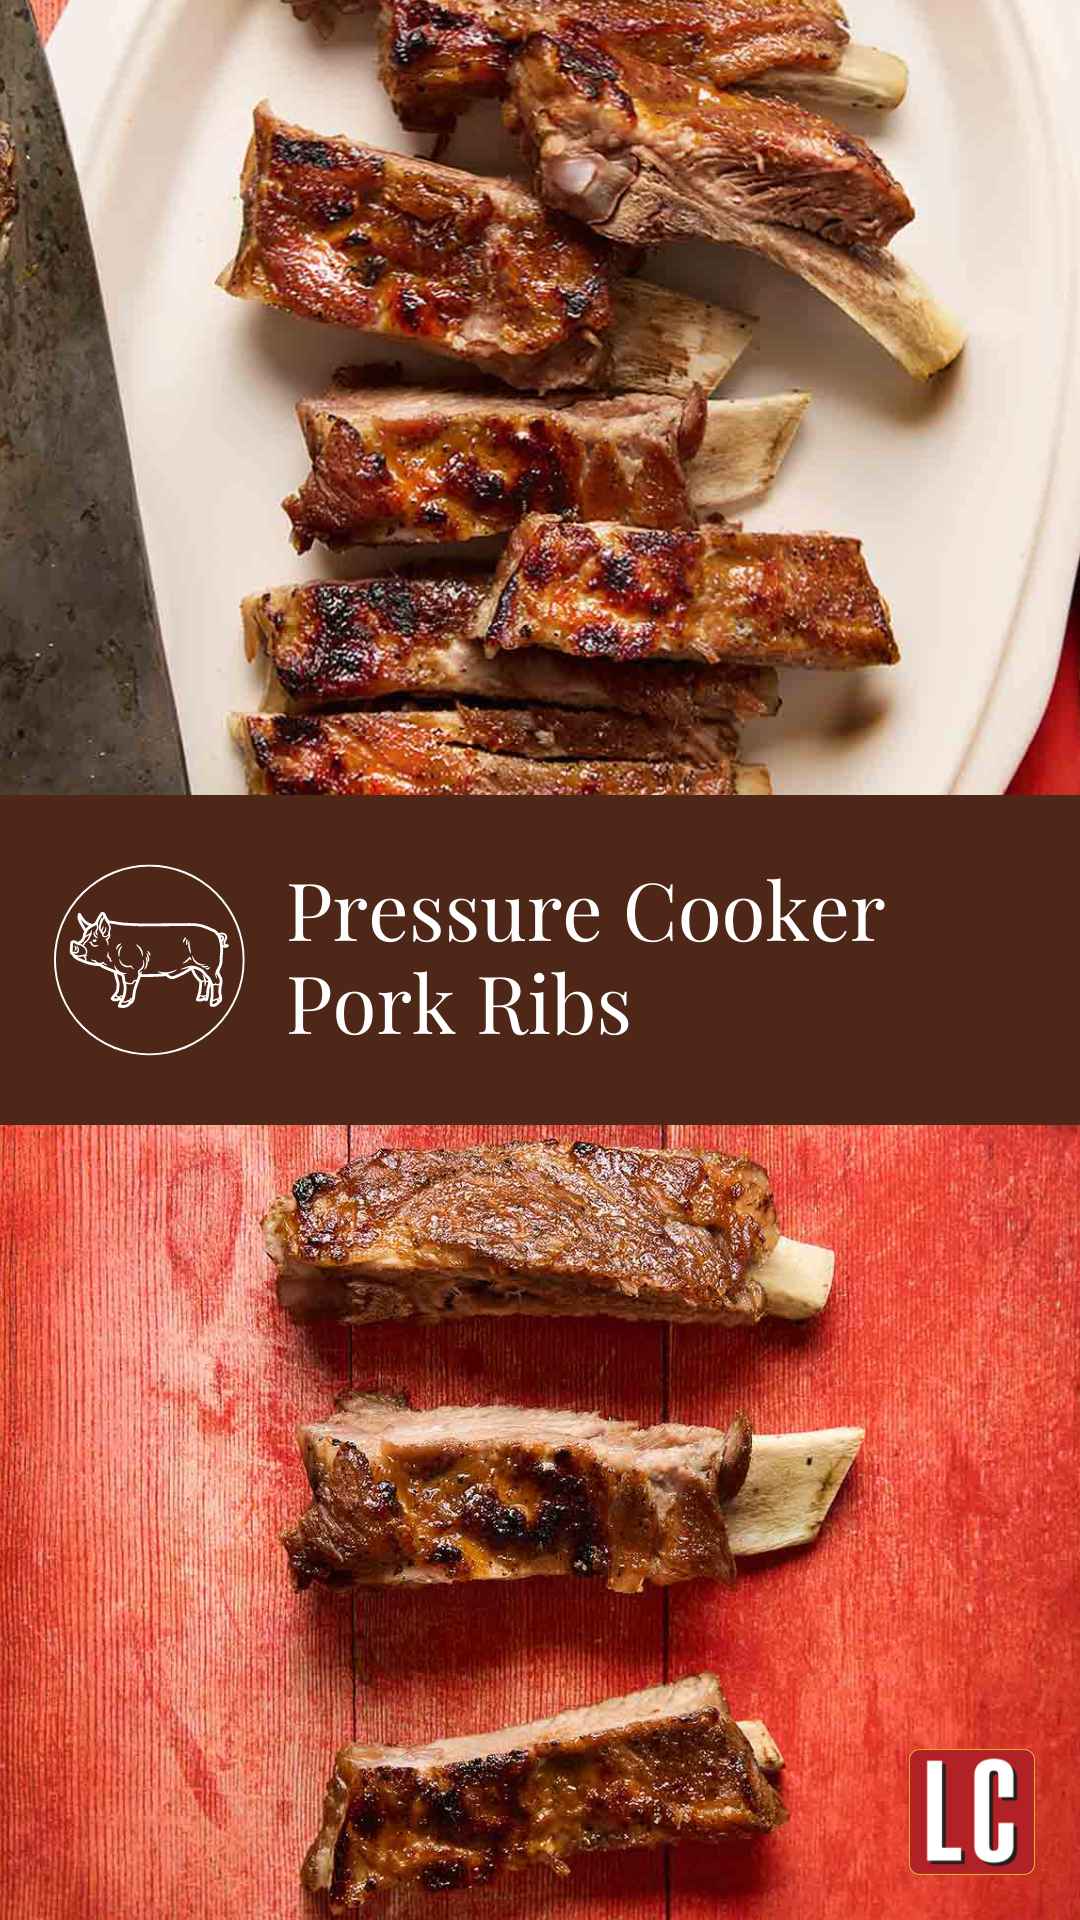 A platter of pressure cooker ribs cut into individual ribs, with a carving knife on the side and three individual ribs on a red wooden board.